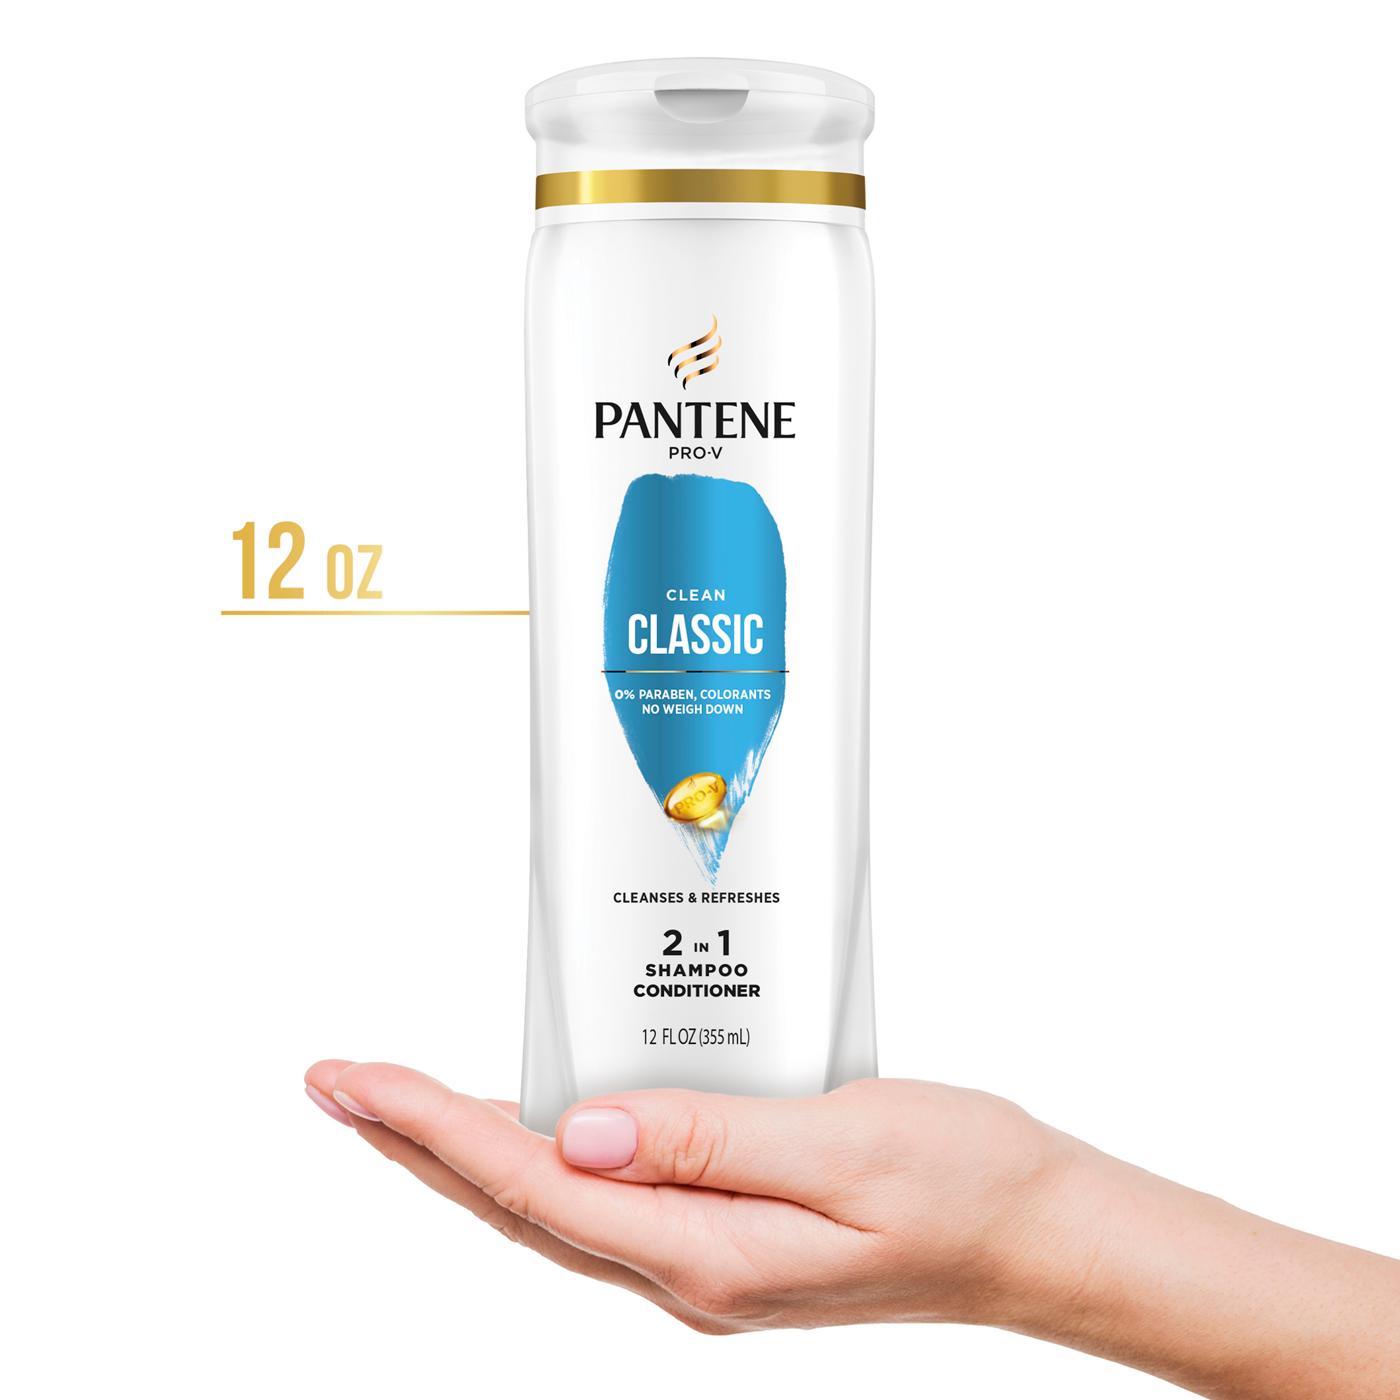 Pantene Pro-V Classic Clean 2 in 1 Shampoo + Conditioner; image 2 of 8